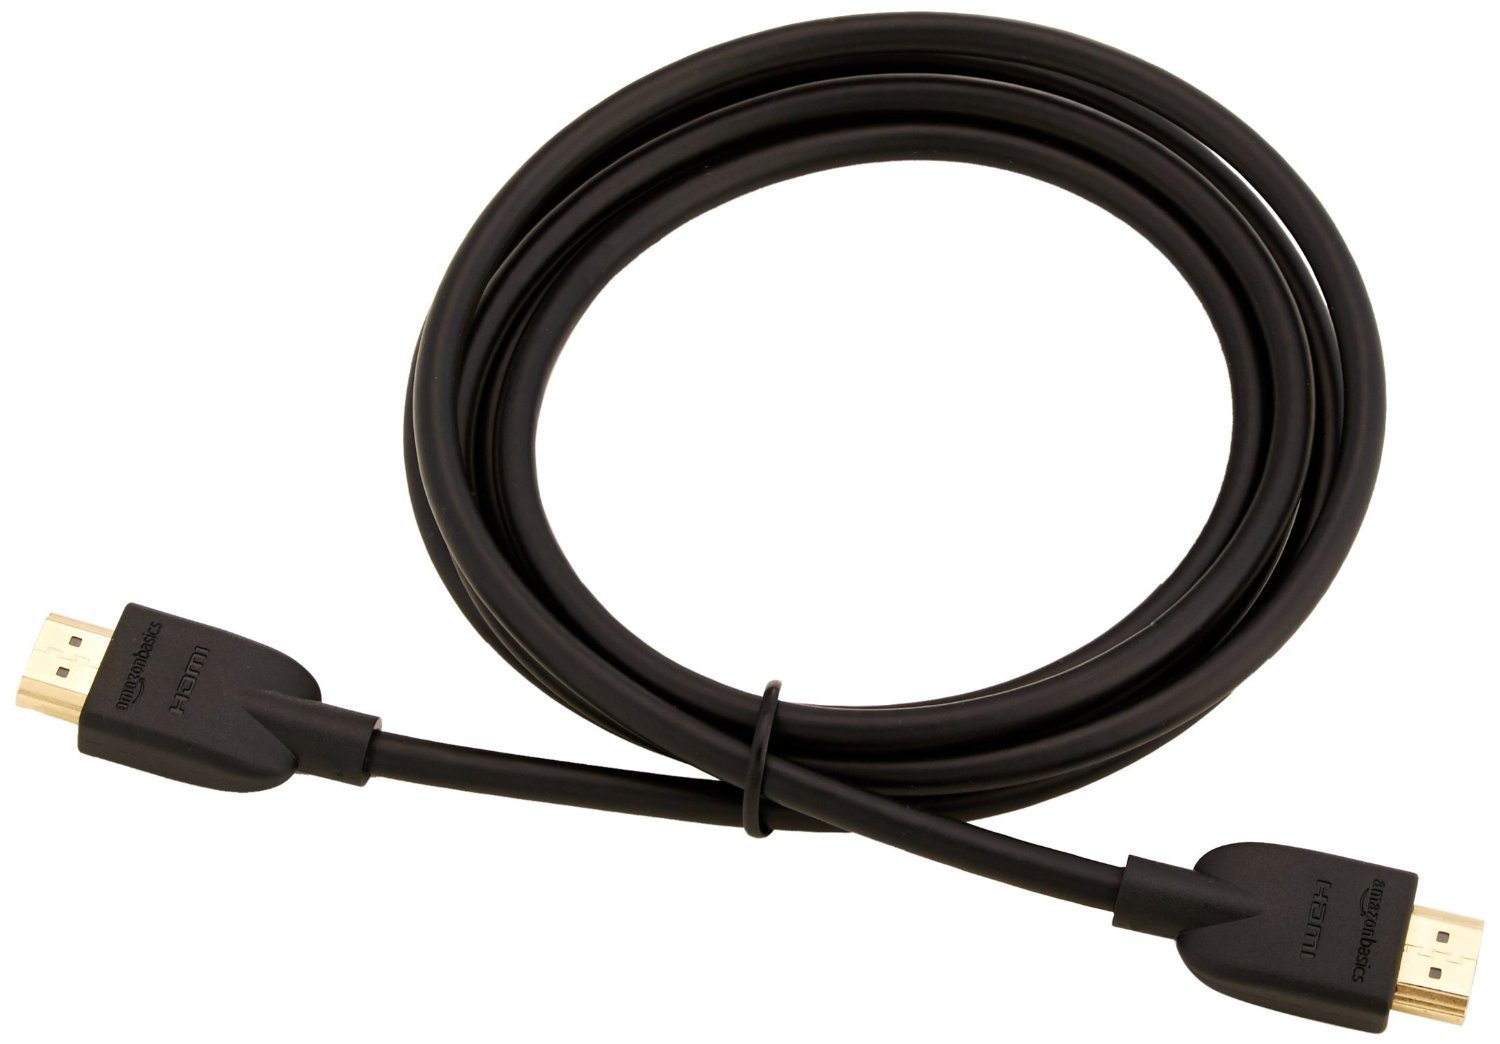 High-Speed HDMI Cable (INCLUDED WITH ANDROID BOX PURCHASE)